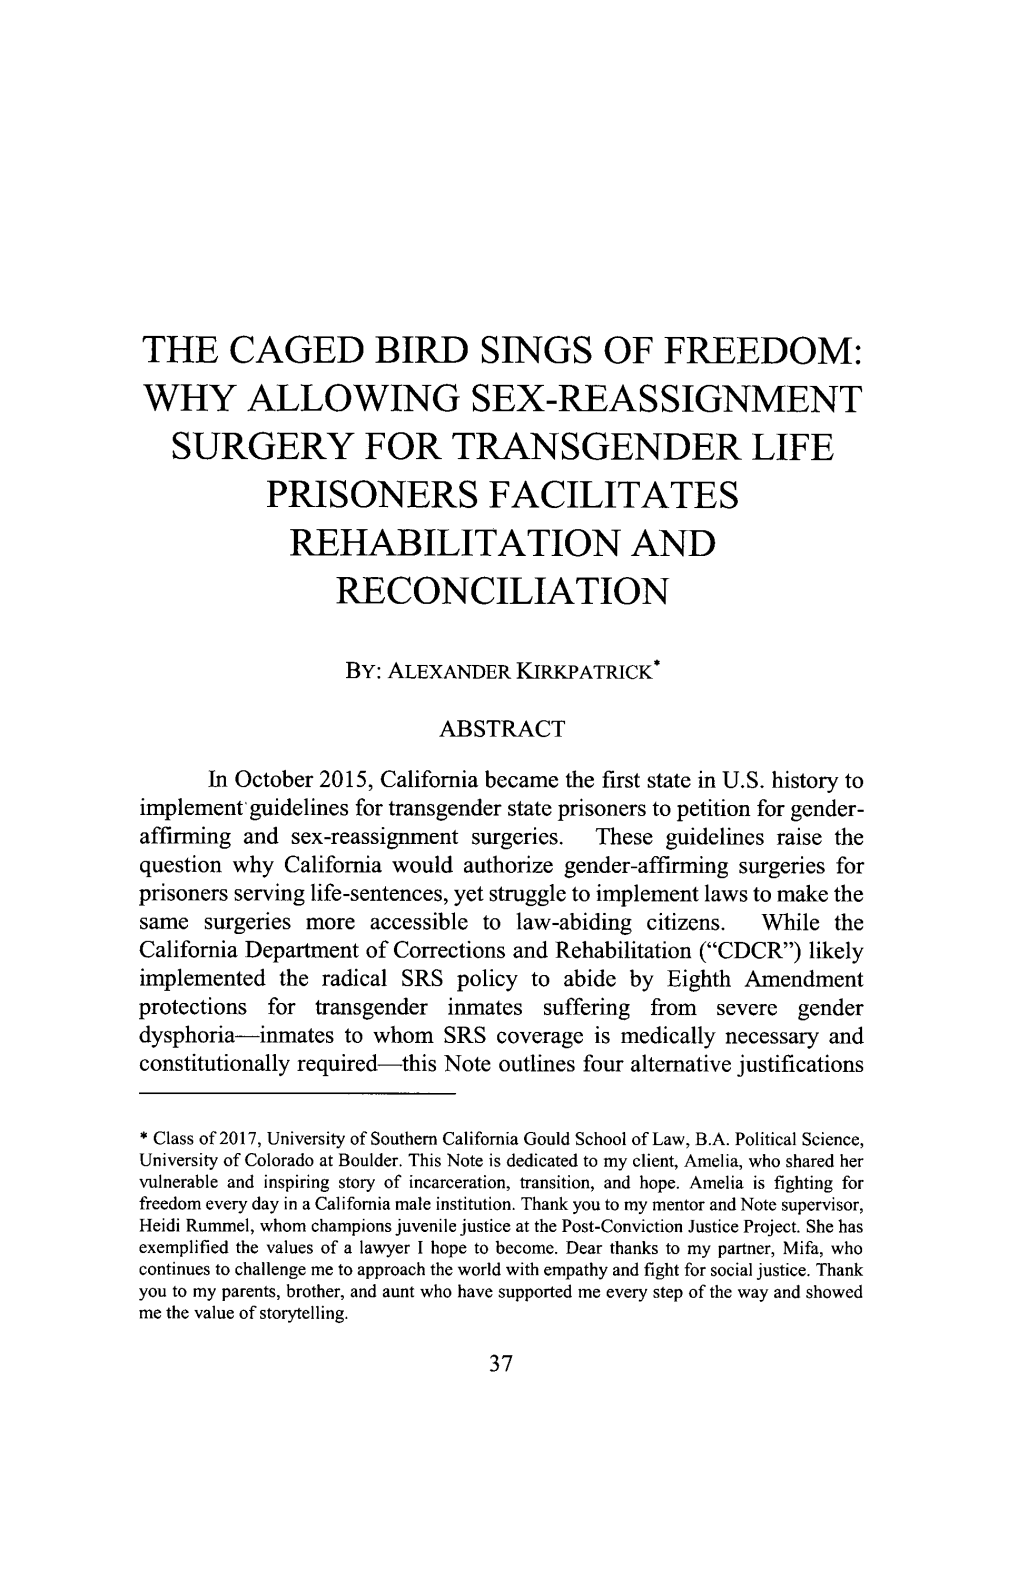 Why Allowing Sex-Reassignment Surgery for Transgender Life Prisoners Facilitates Rehabilitation and Reconciliation